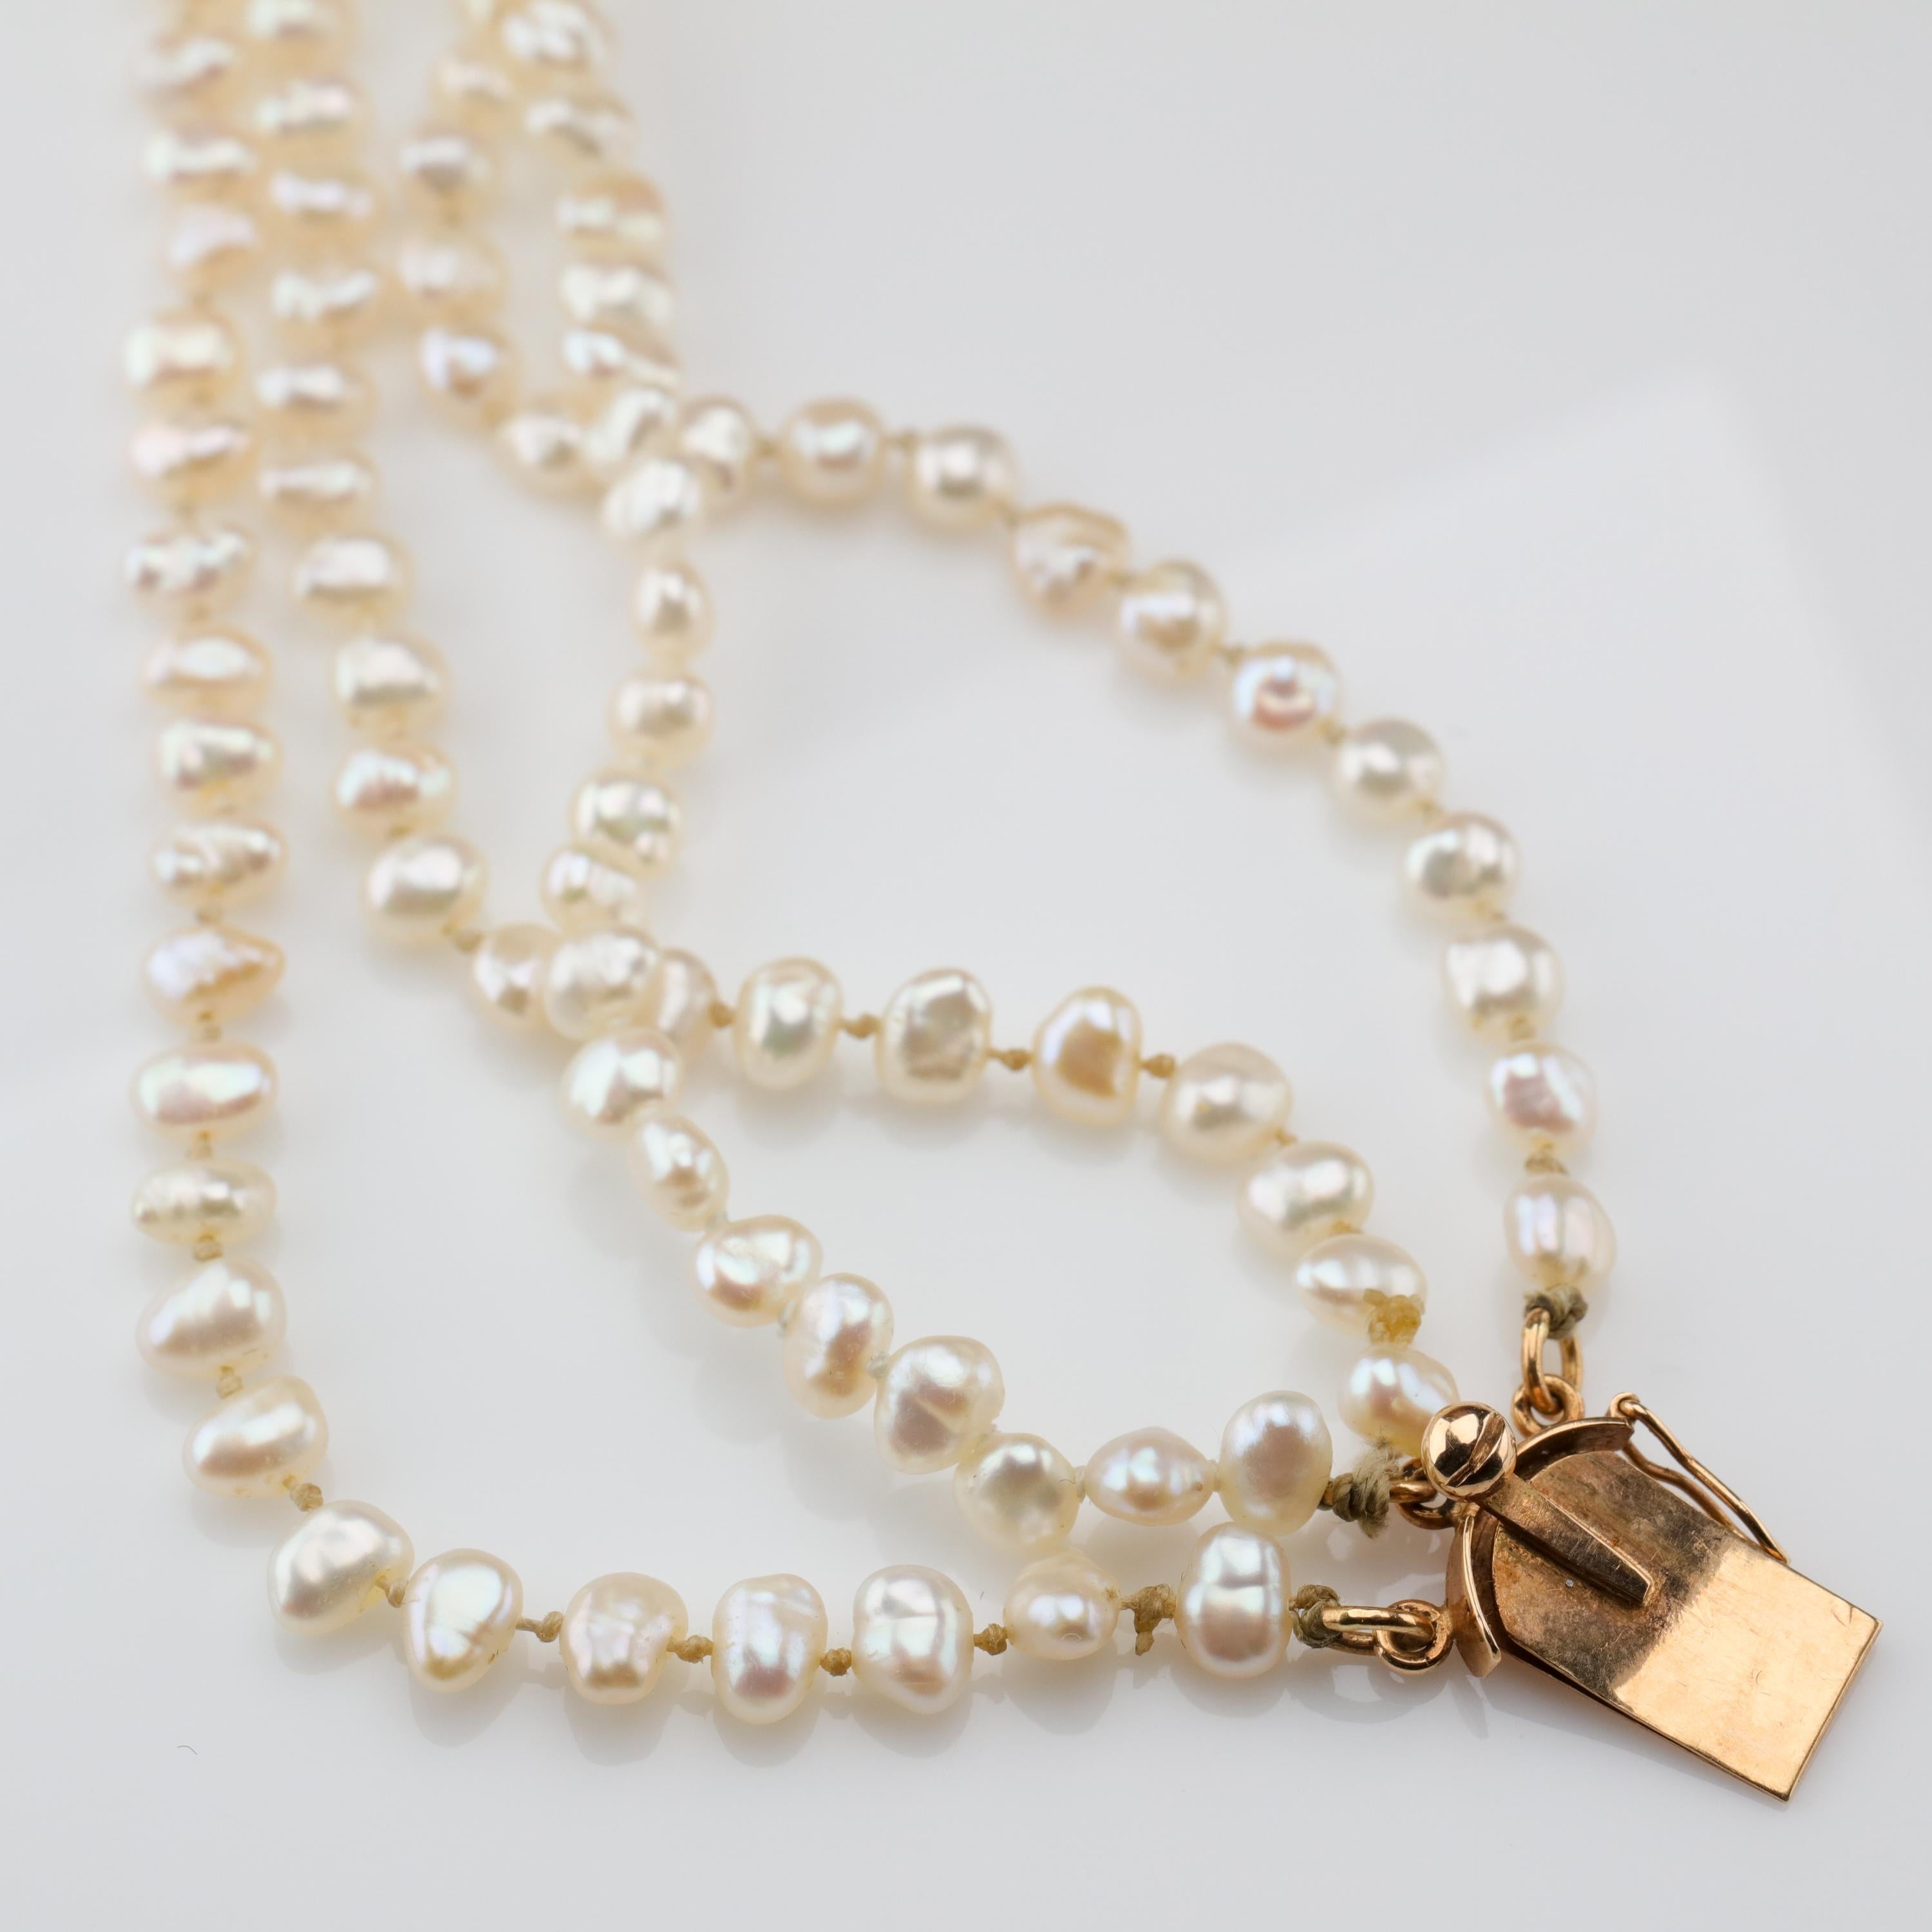 Gump's Pearl and Opal Necklace Features Rare & Authentic Biwa Pearls 5